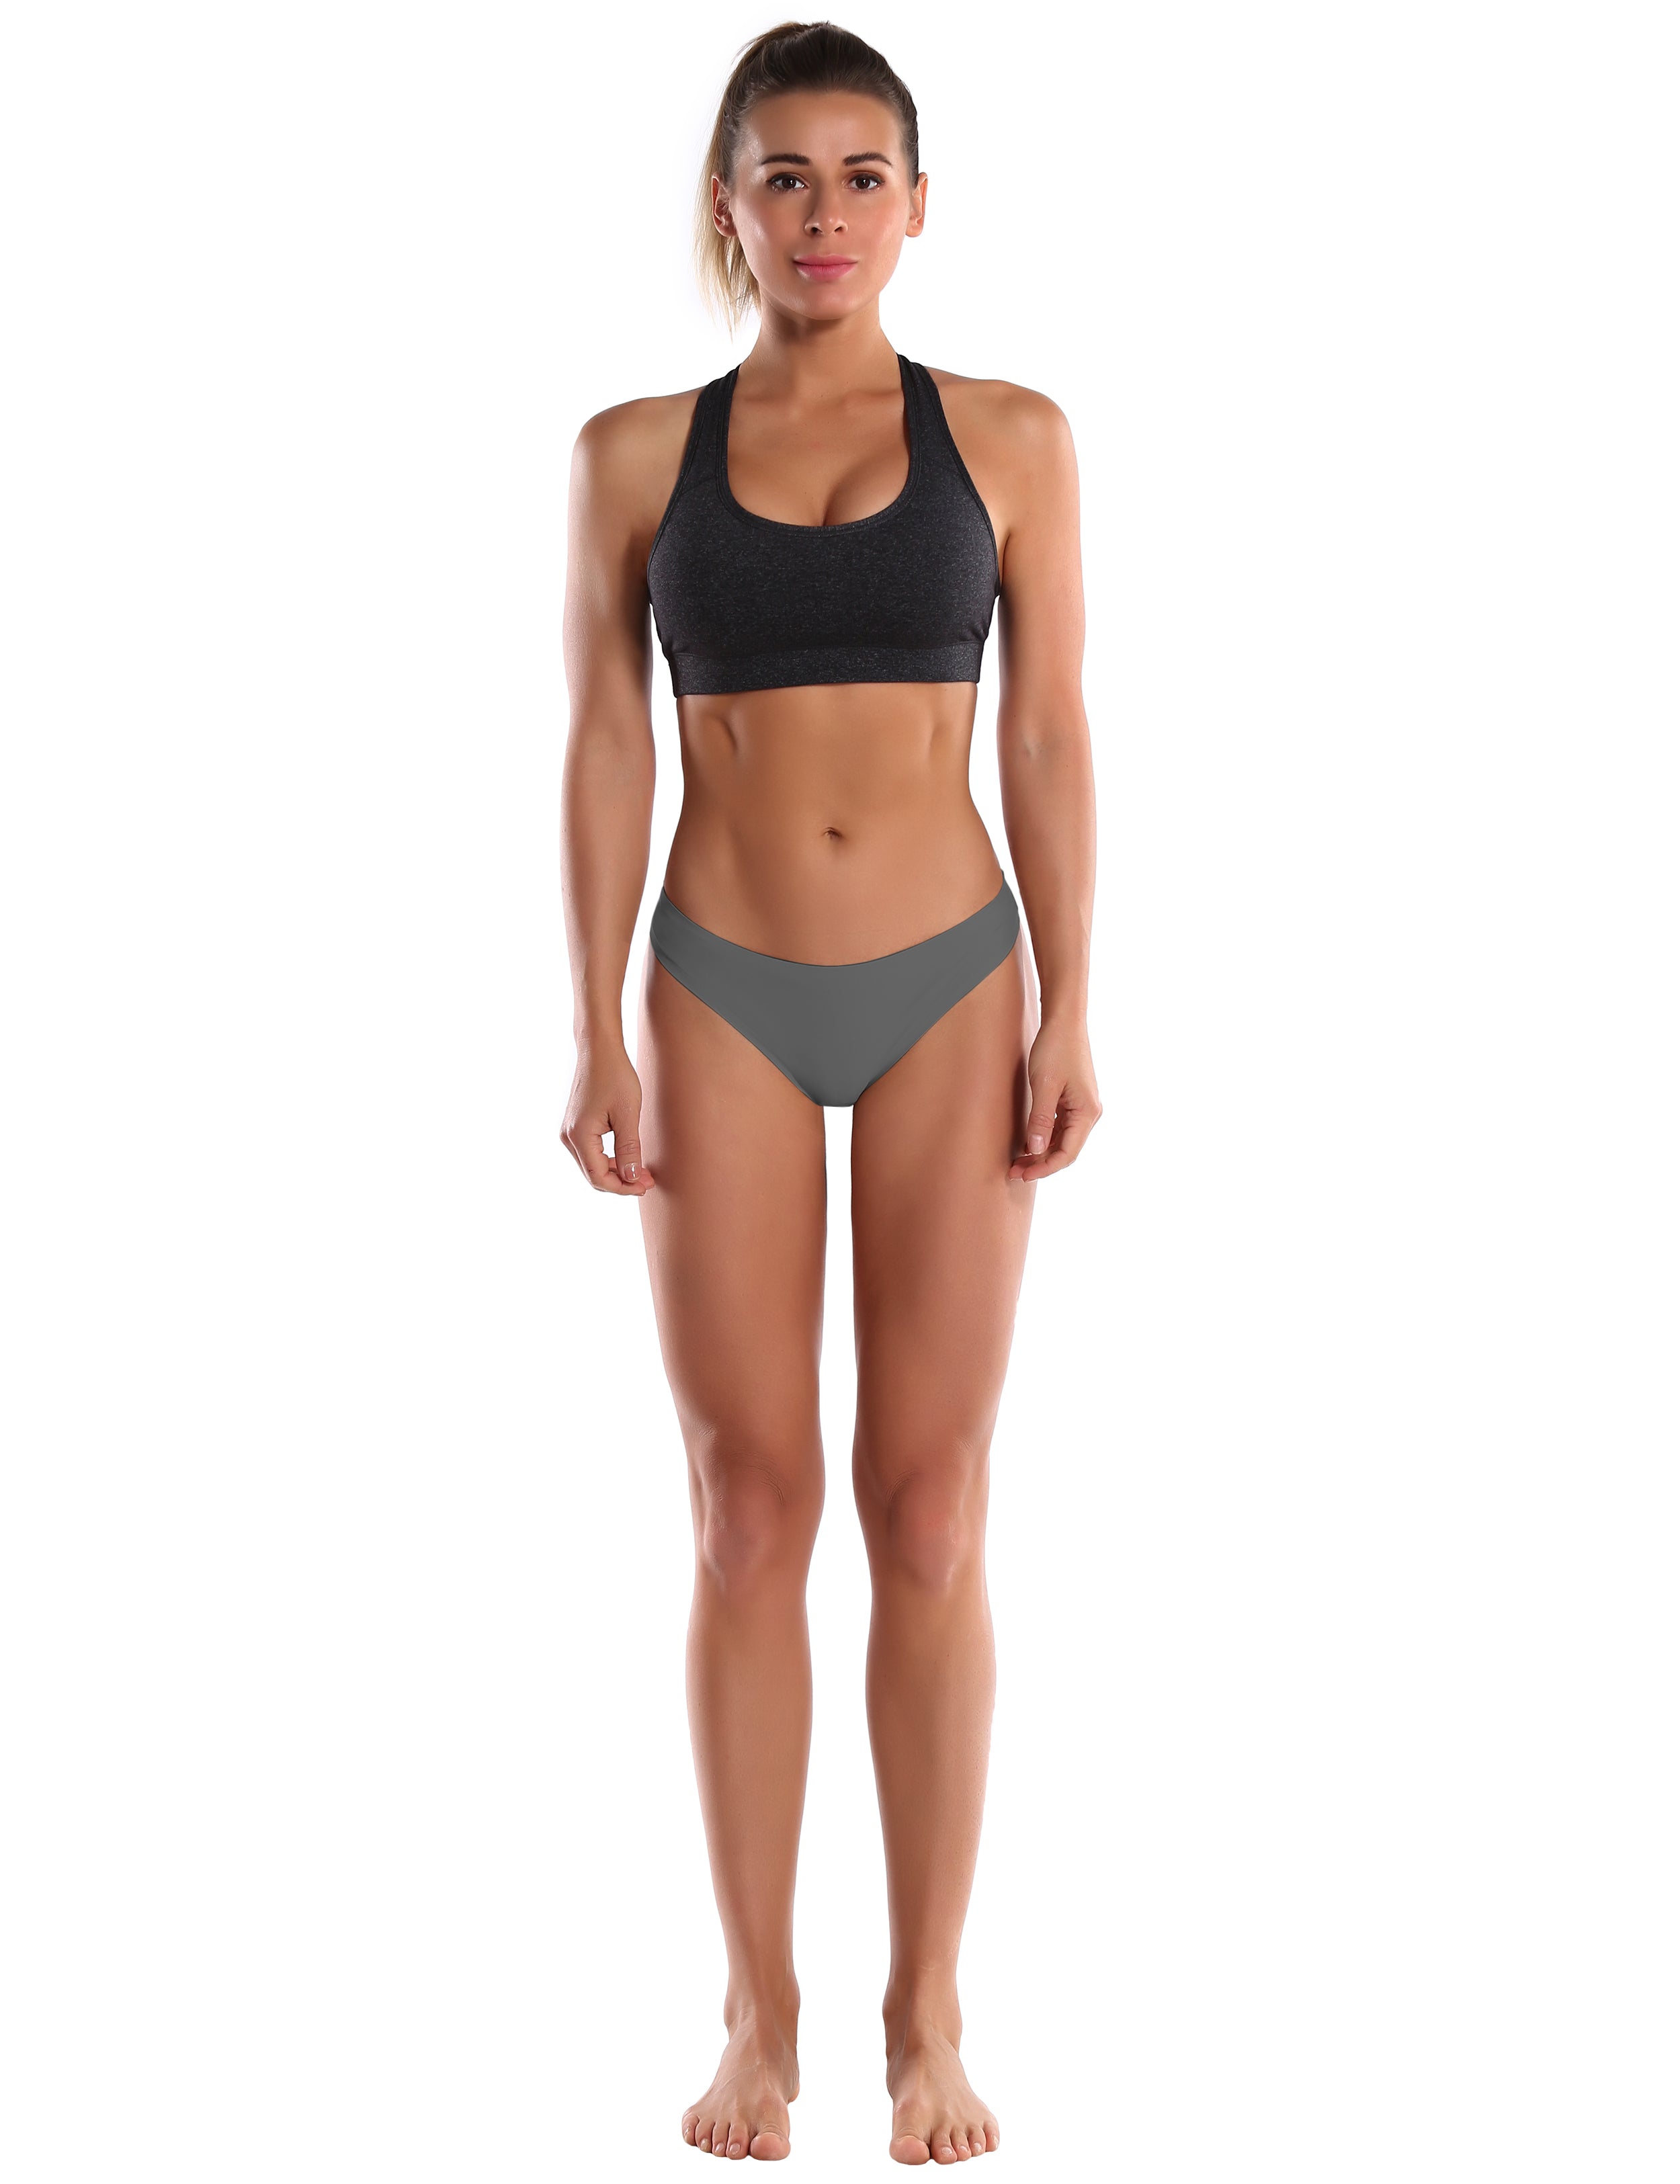 Invisibles Sport Thongs Darkgray Sleek, soft, smooth and totally comfortable: our newest thongs style is here. High elasticity High density Softest-ever fabric Laser cutting Unsealed Comfortable No panty lines Machine wash 95% Nylon, 5% Spandex